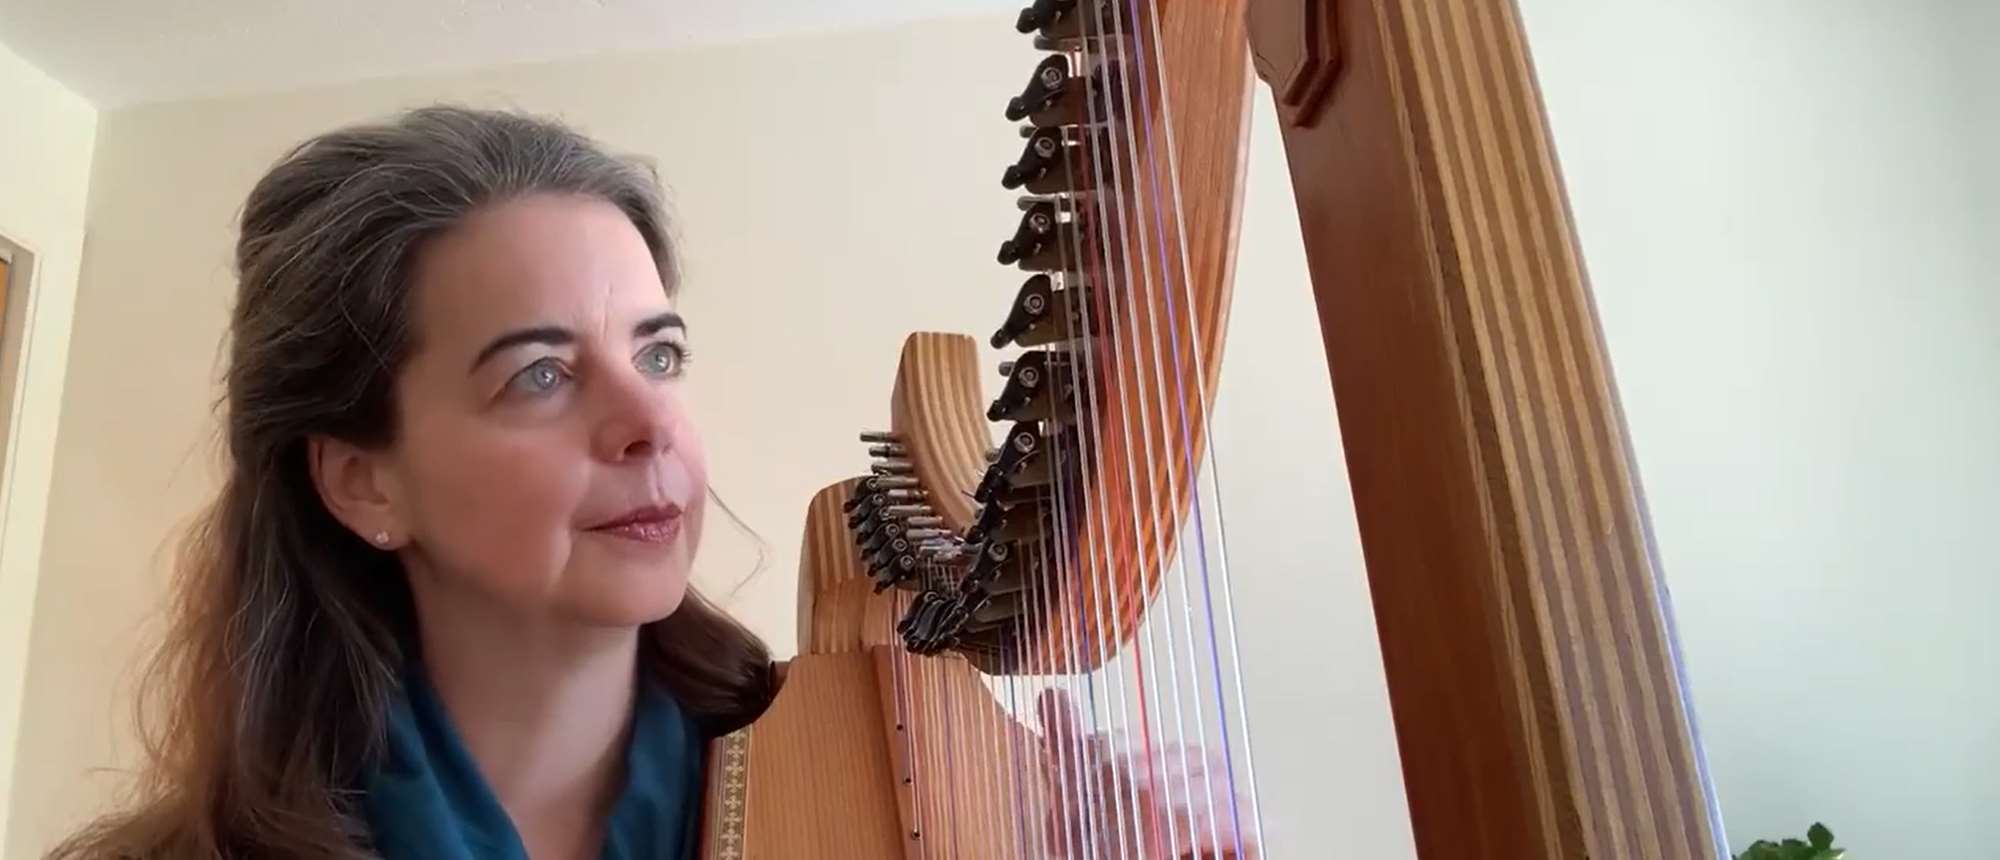 Harps of Comfort | Innovative program helps COVID-19 patients find comfort with music